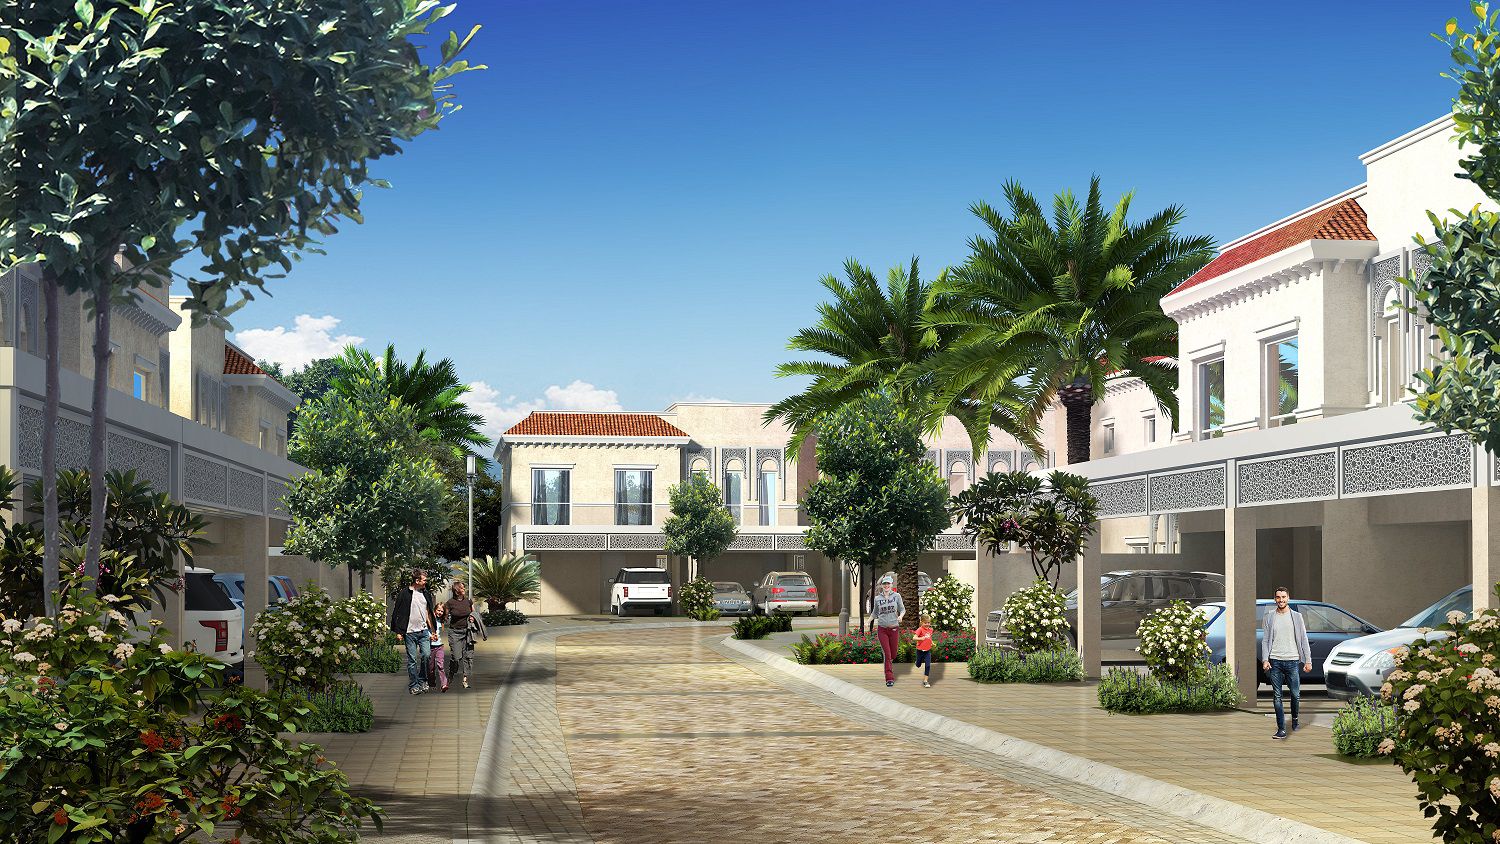 ALANDALUS TOWNHOUSES IN JUMEIRAH GOLF ESTATES OFFICIALLY SOLD OUT